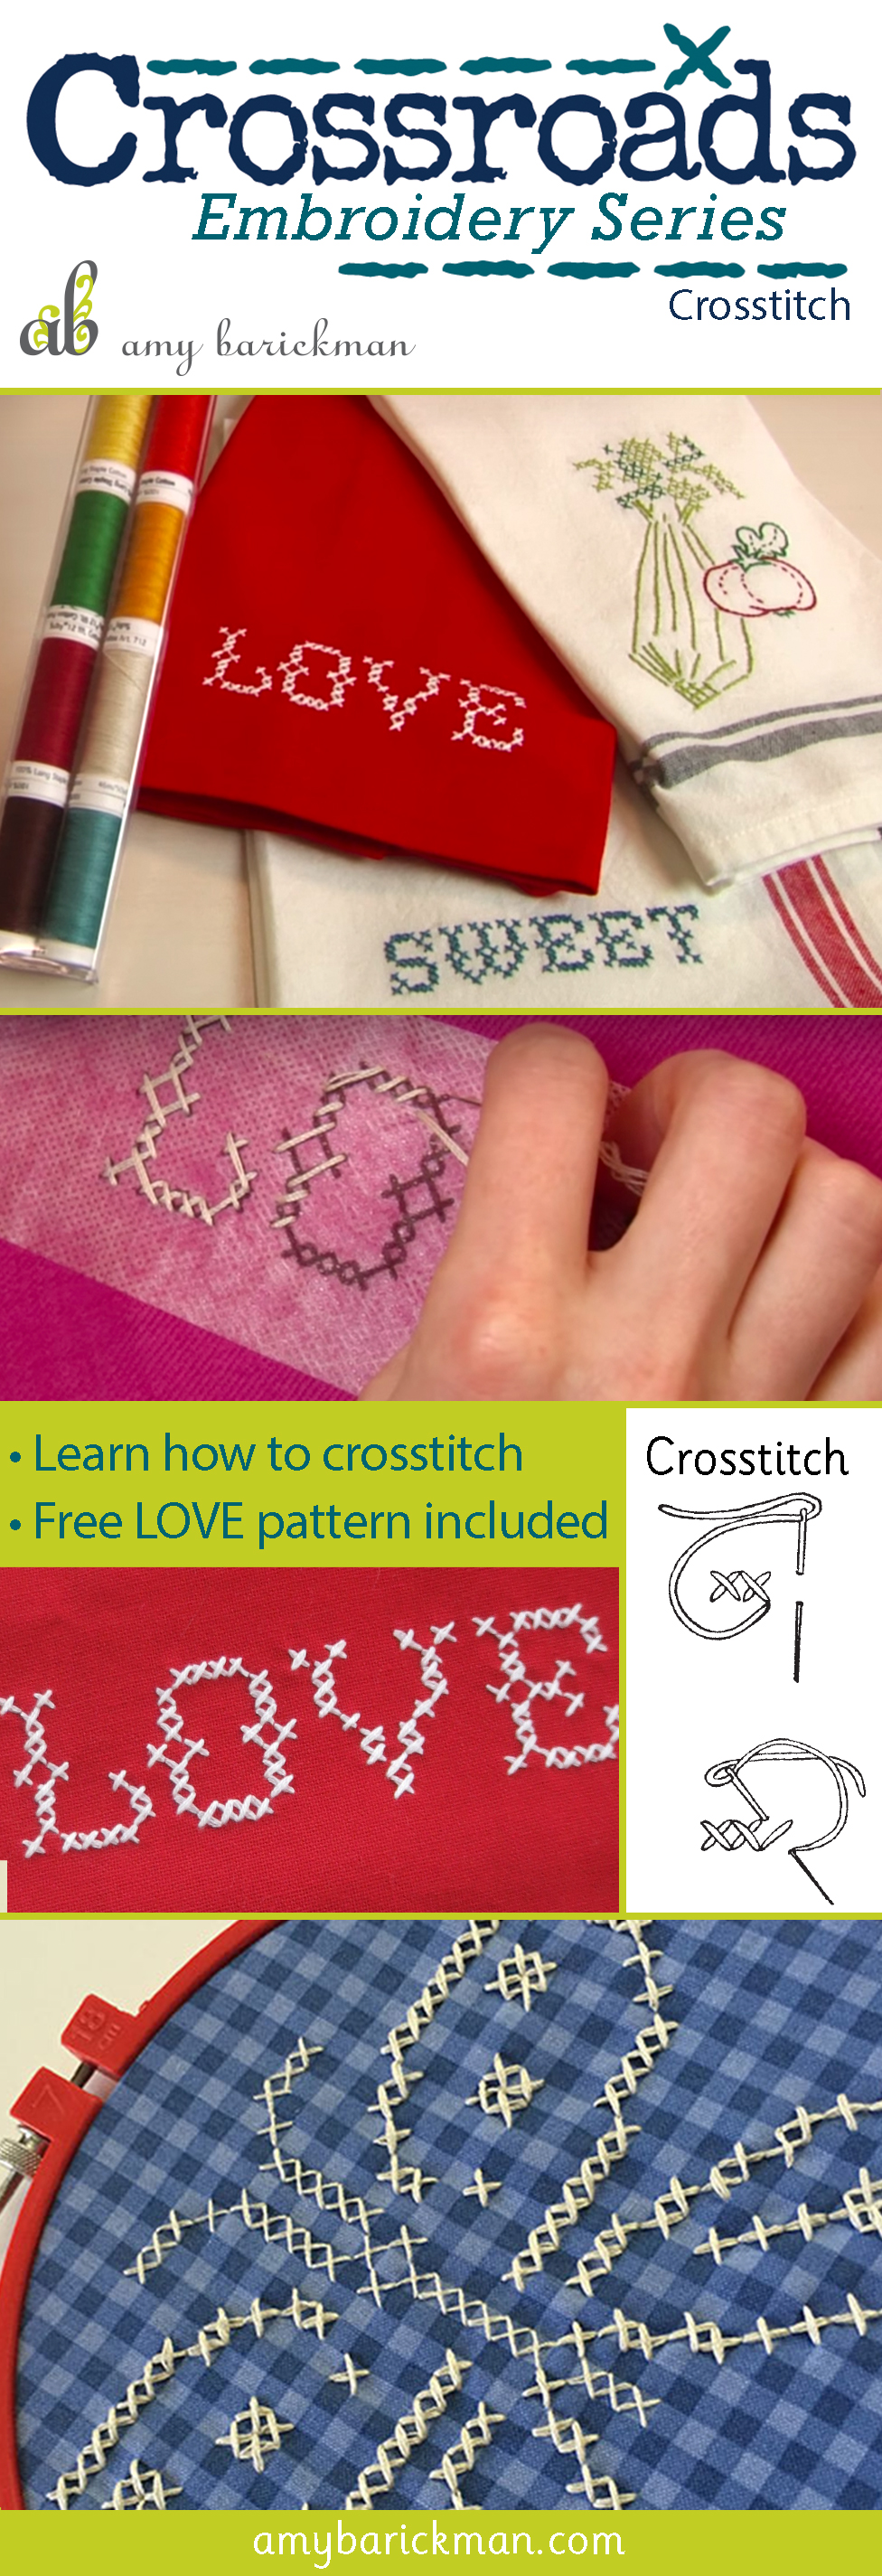 Learn embroidery stitches with Amy Barickman! Includes free pattern!